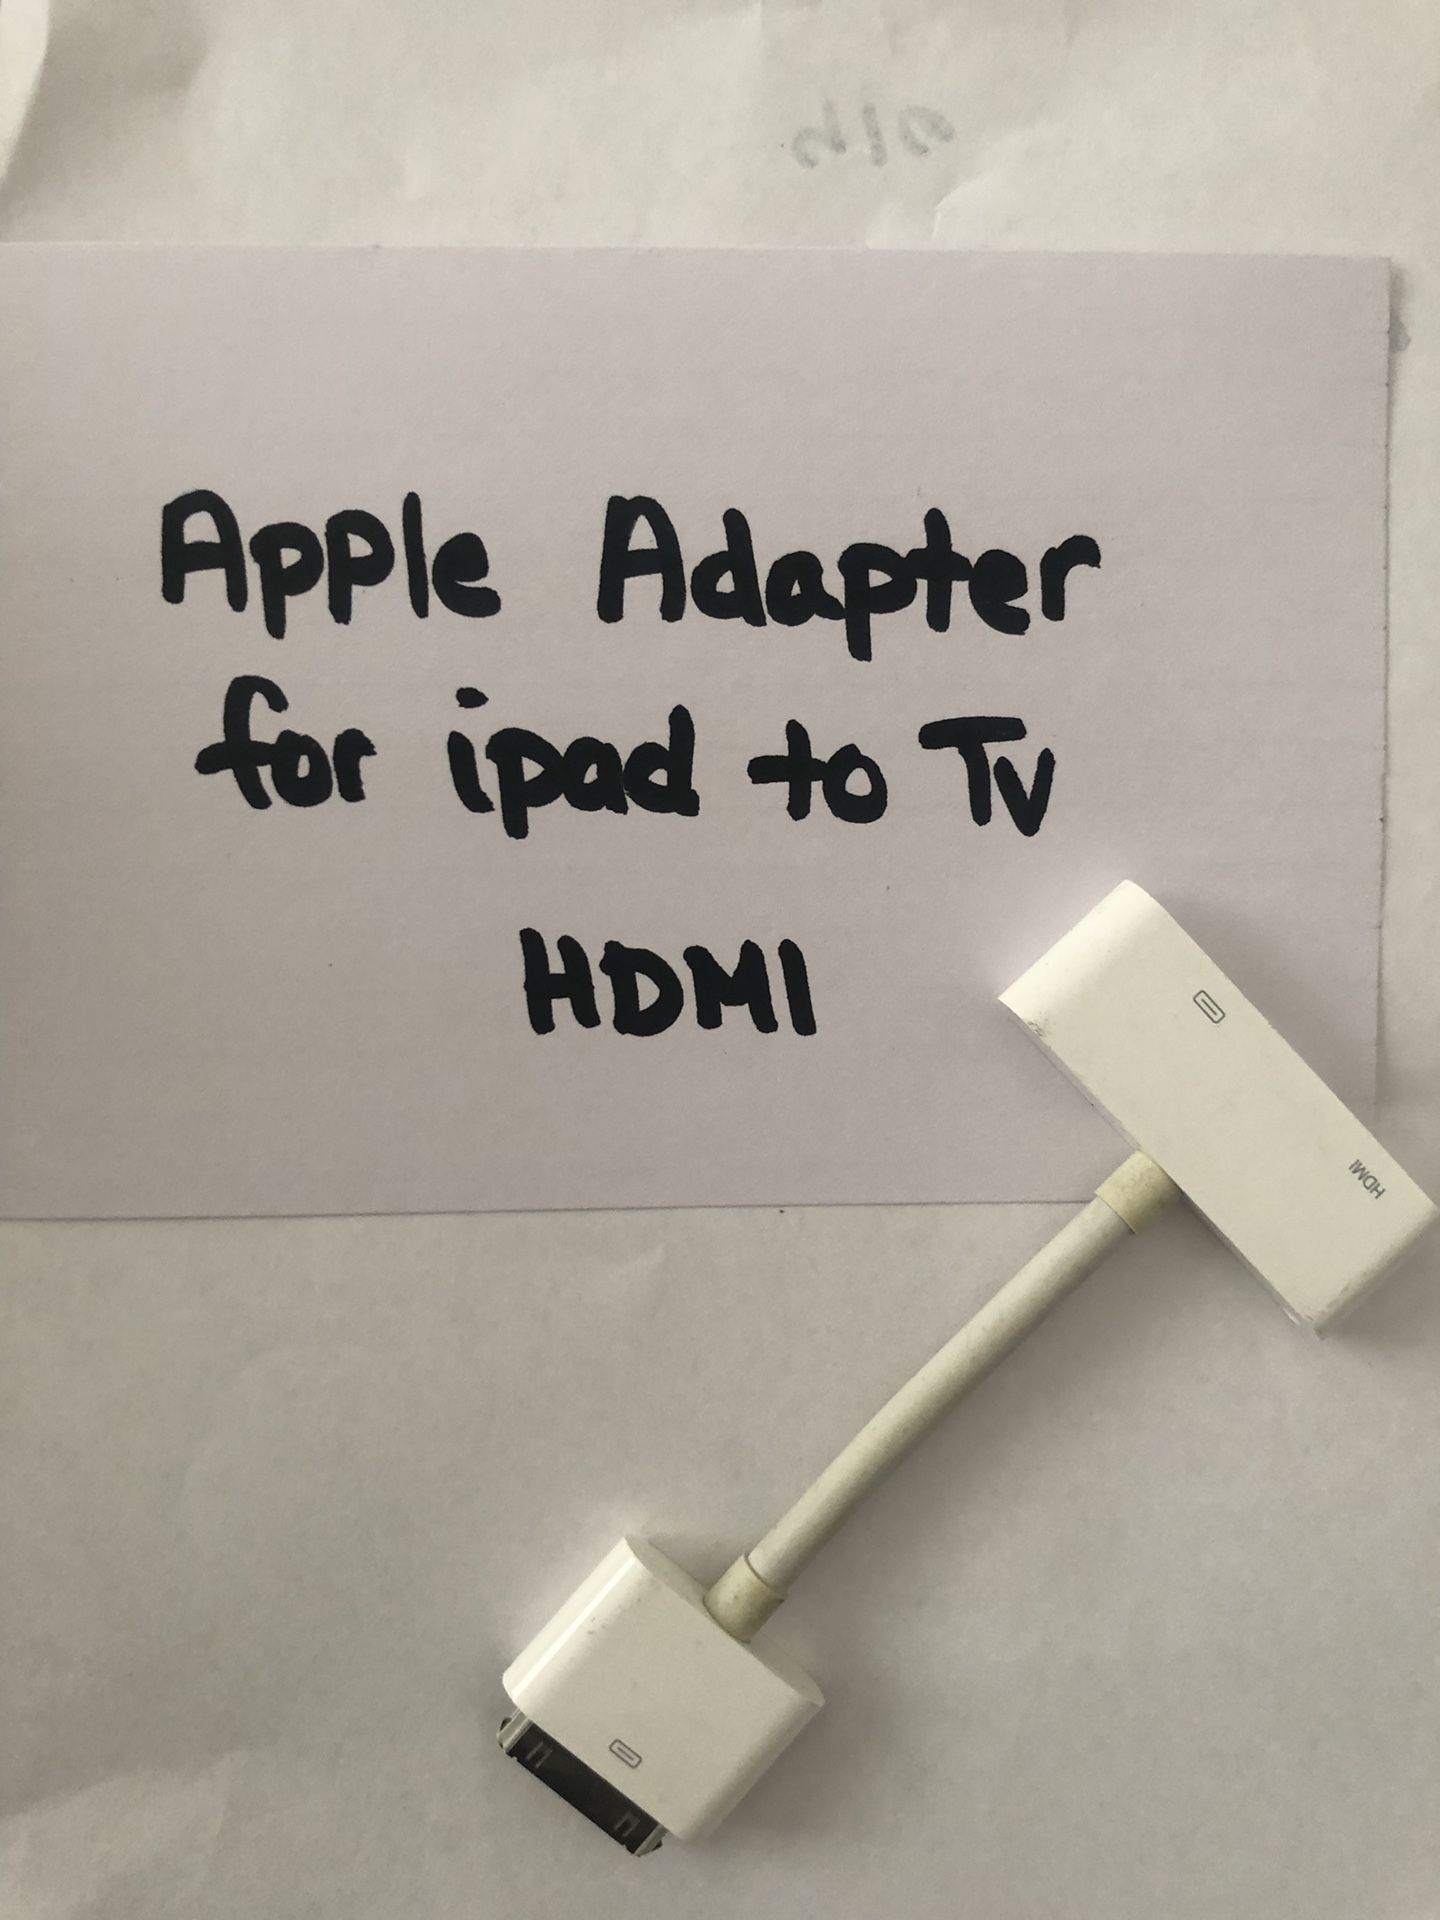 Apple adapter for iPad to TV